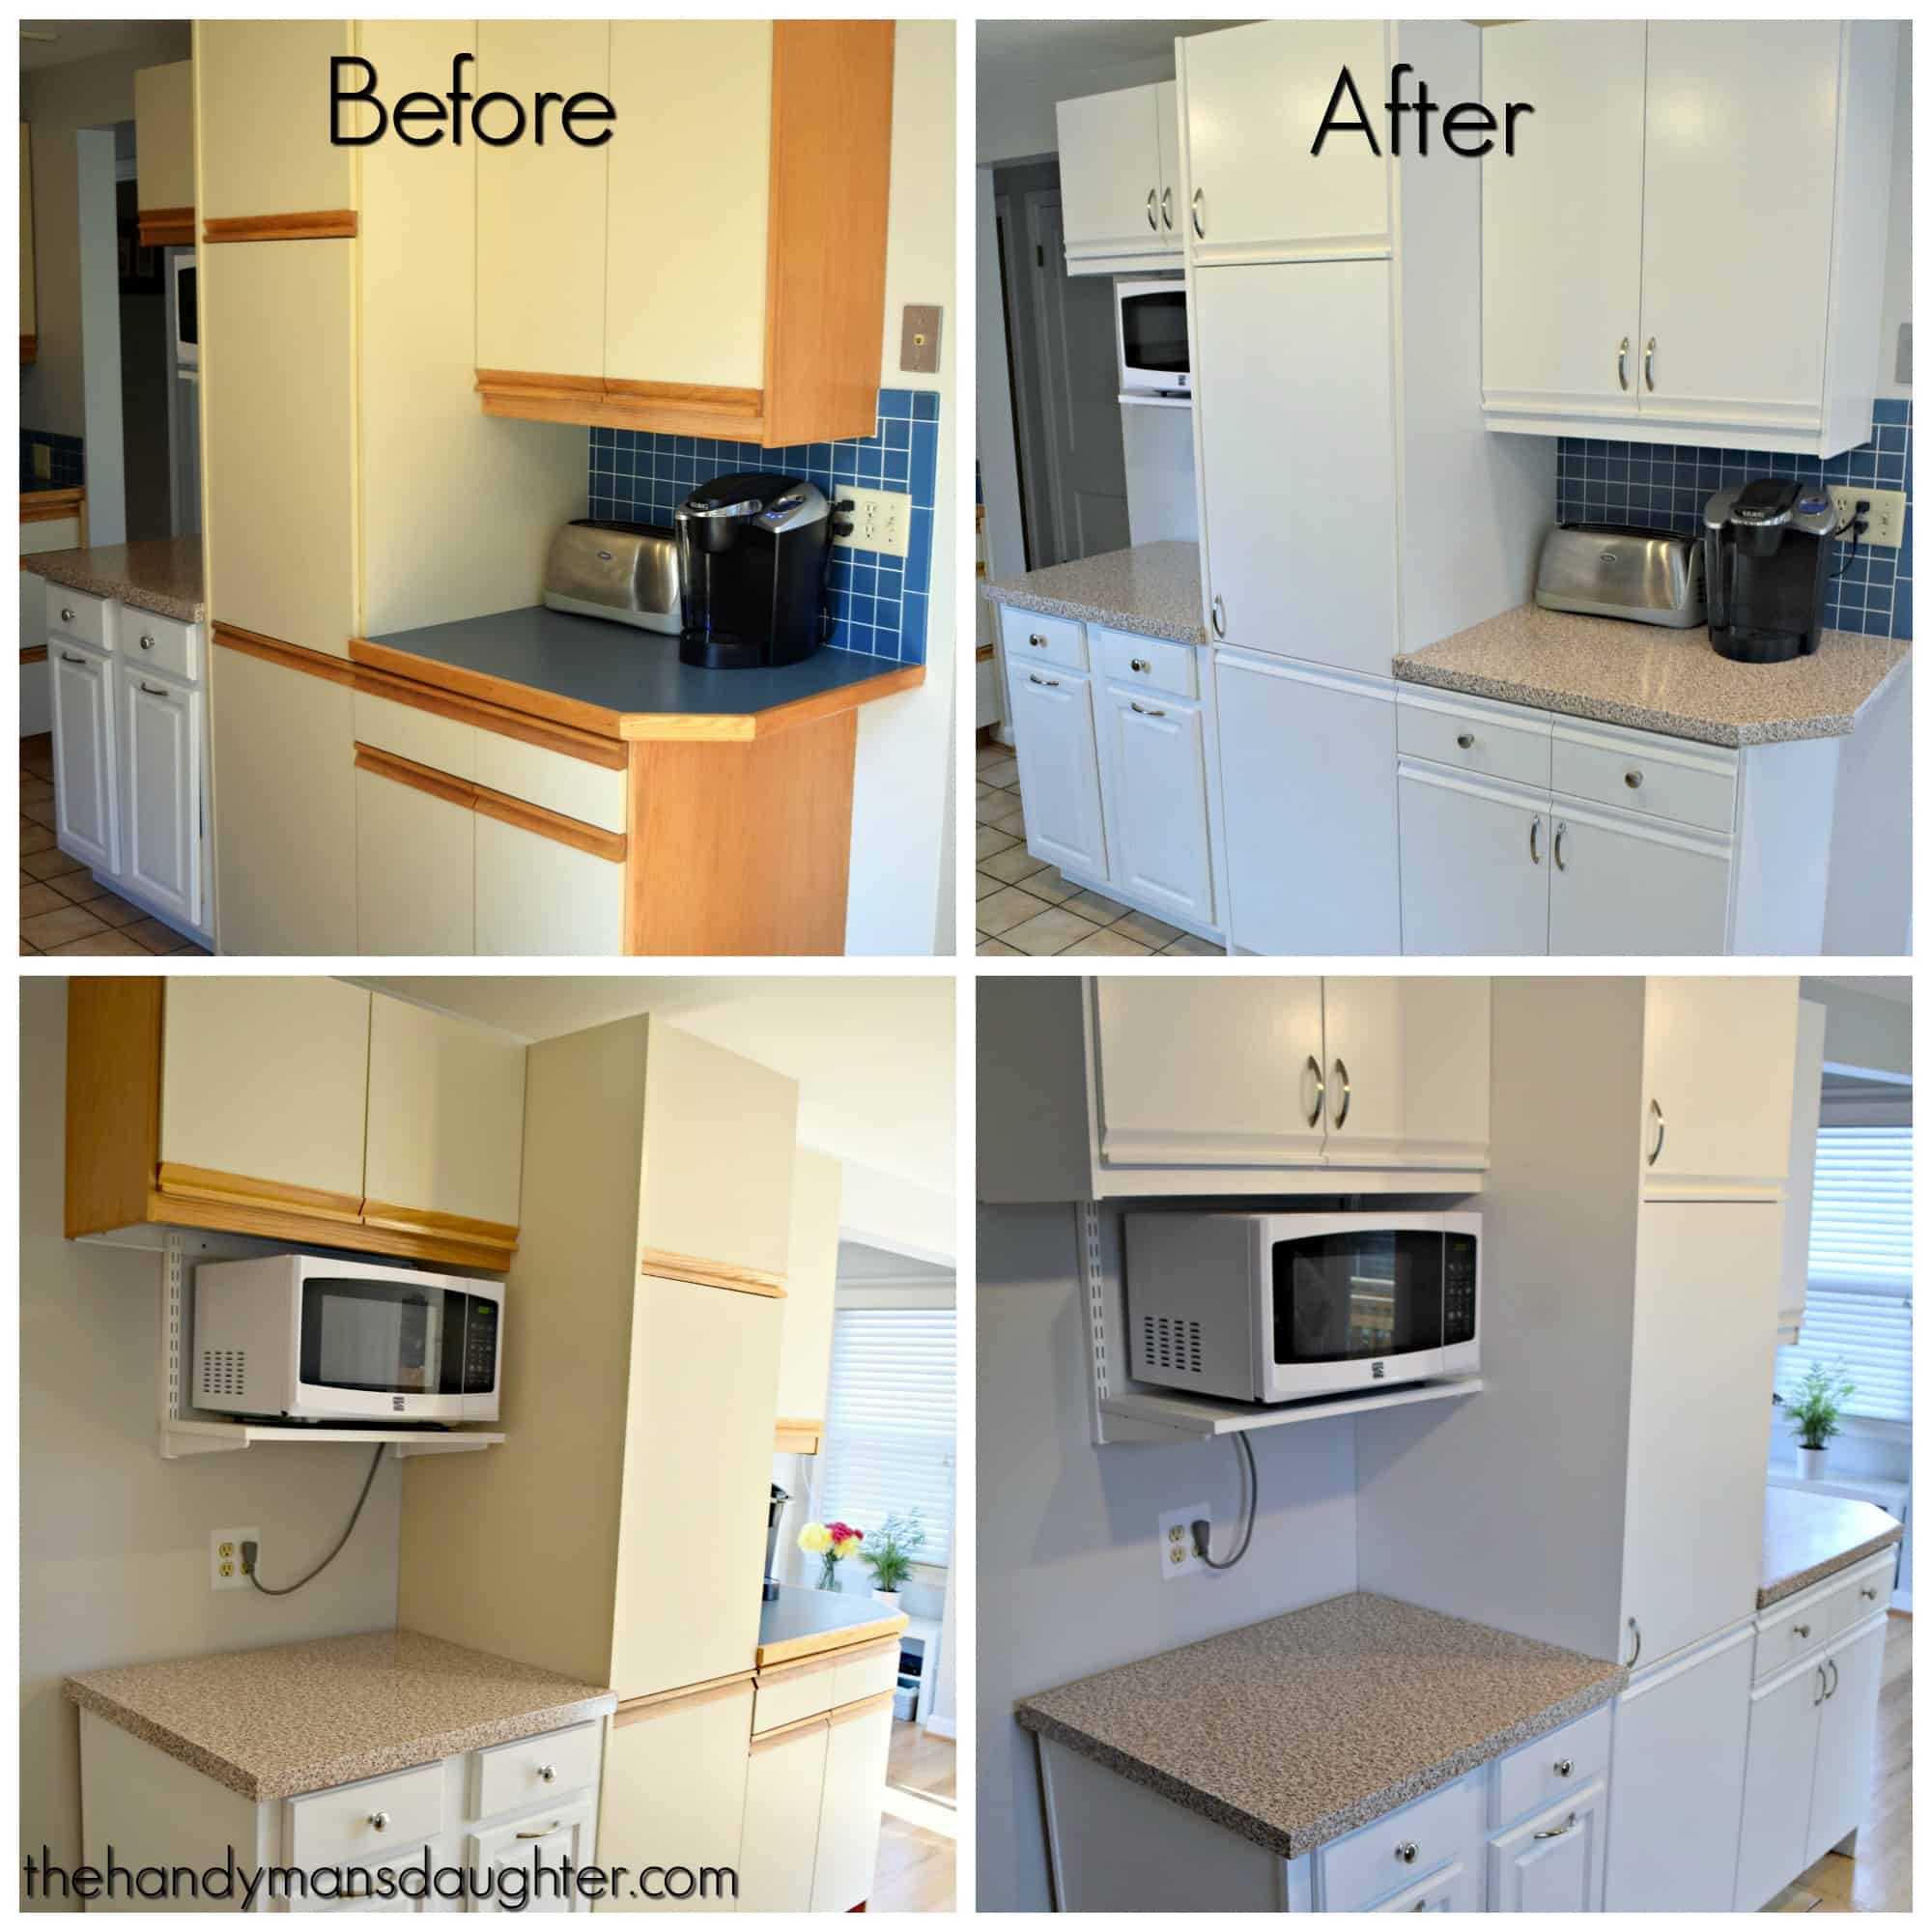 before and after grid of photos showing painted melamine cabinets with oak trim